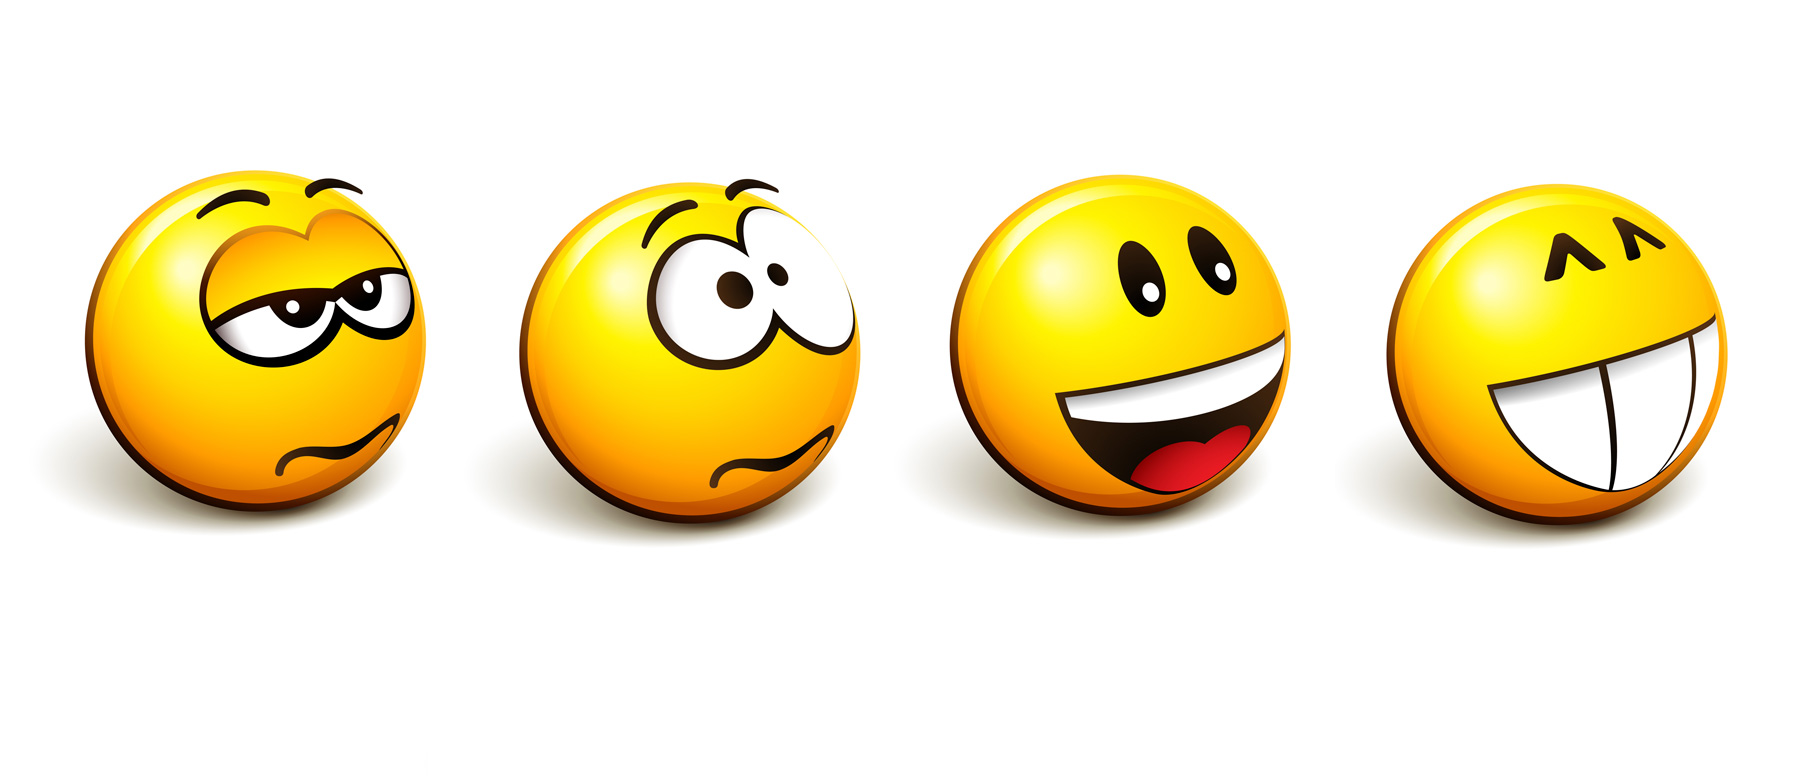 free animated clipart emotions - photo #15